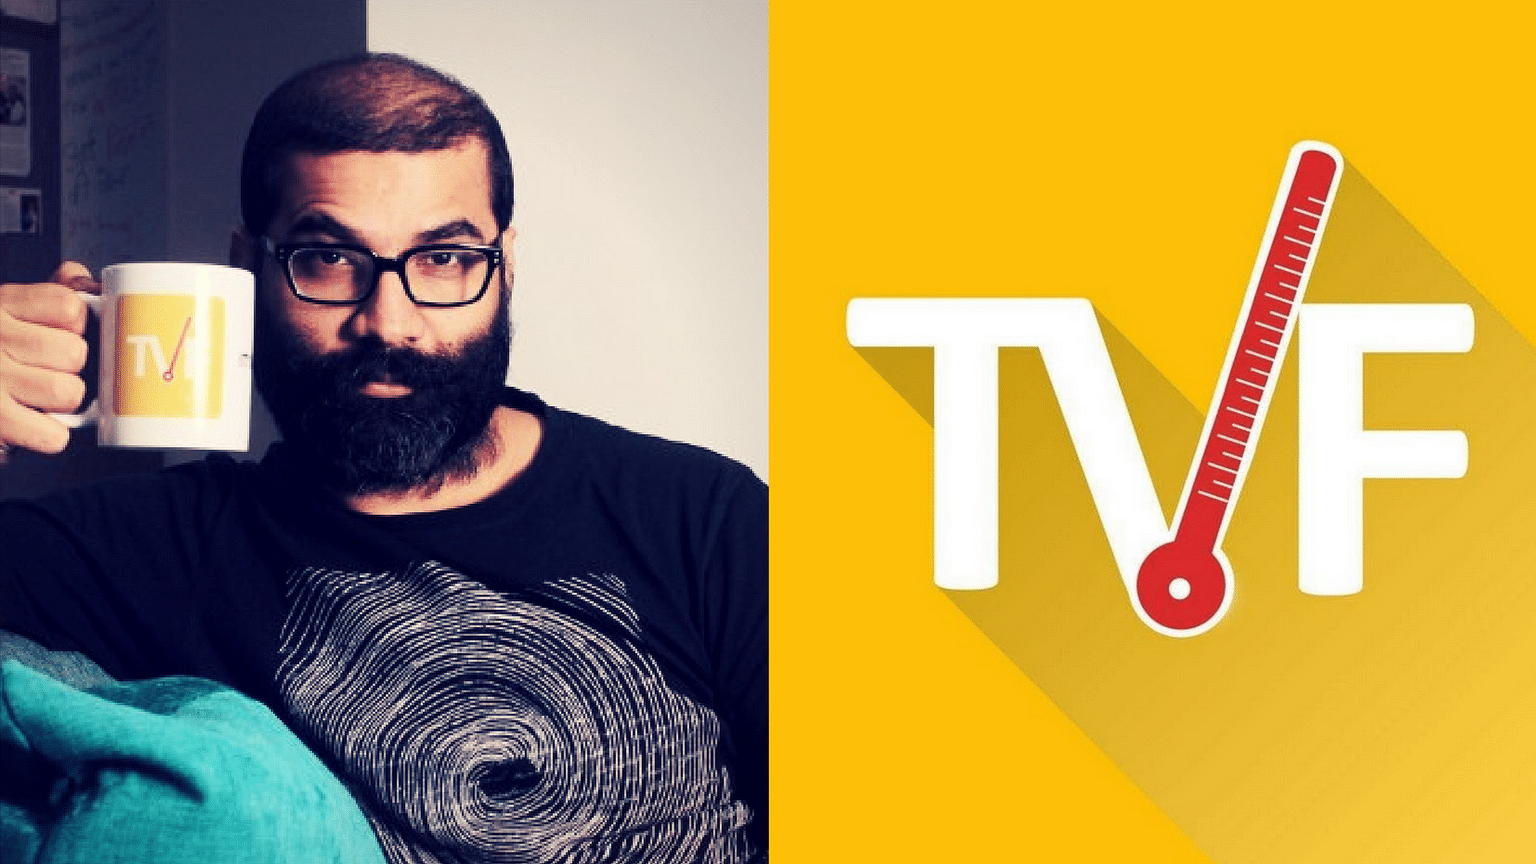 TVF responds to the multiple complaints of sexual harassment against  founder and CEO Arunabh Kumar